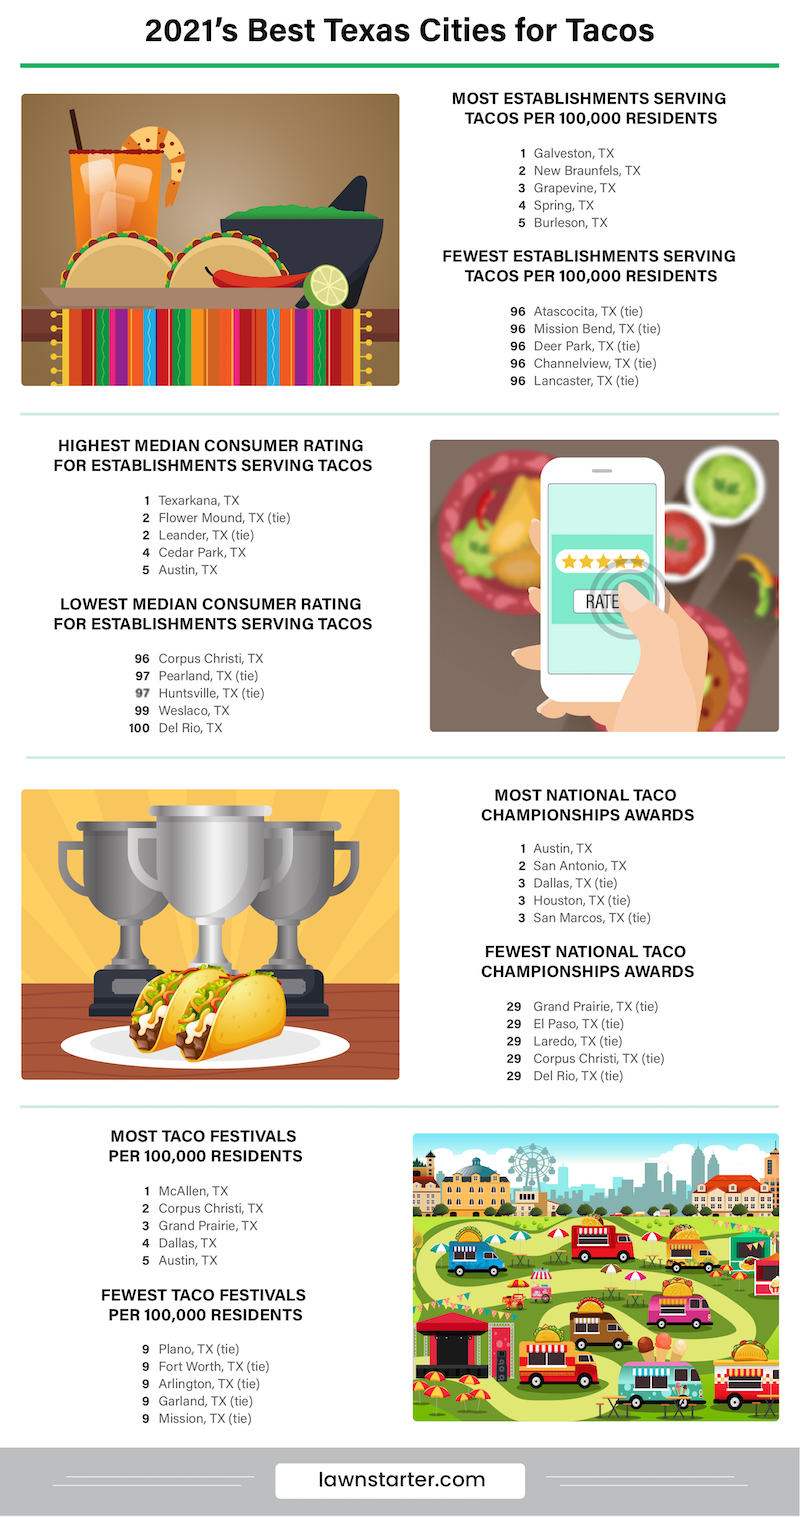 Infographic showing the best Texas cities for tacos, a ranking based on taco access, taco competition awards, consumer ratings, and taco festivals